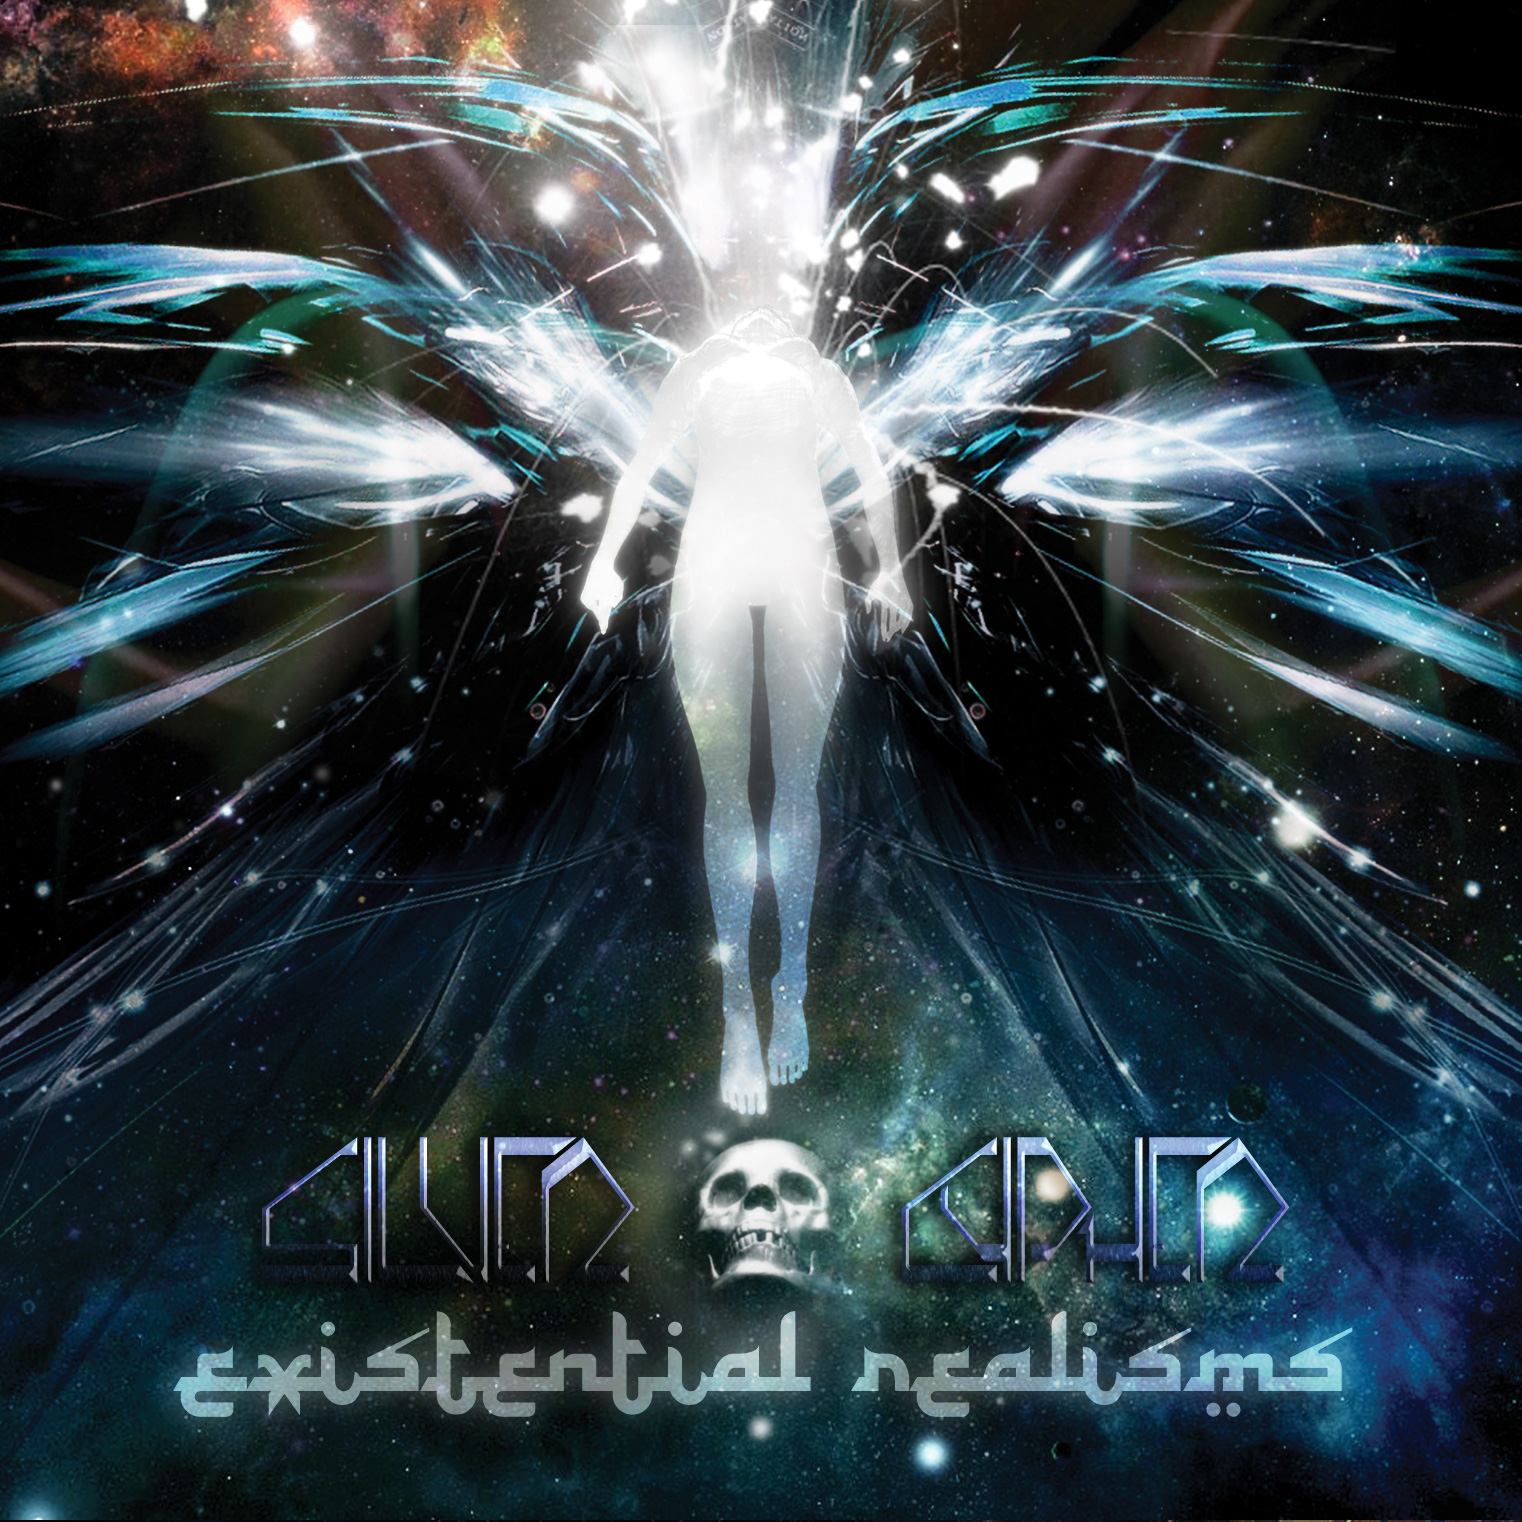 CD cover for a metal band, featuring an ethereal woman ascending into the stars